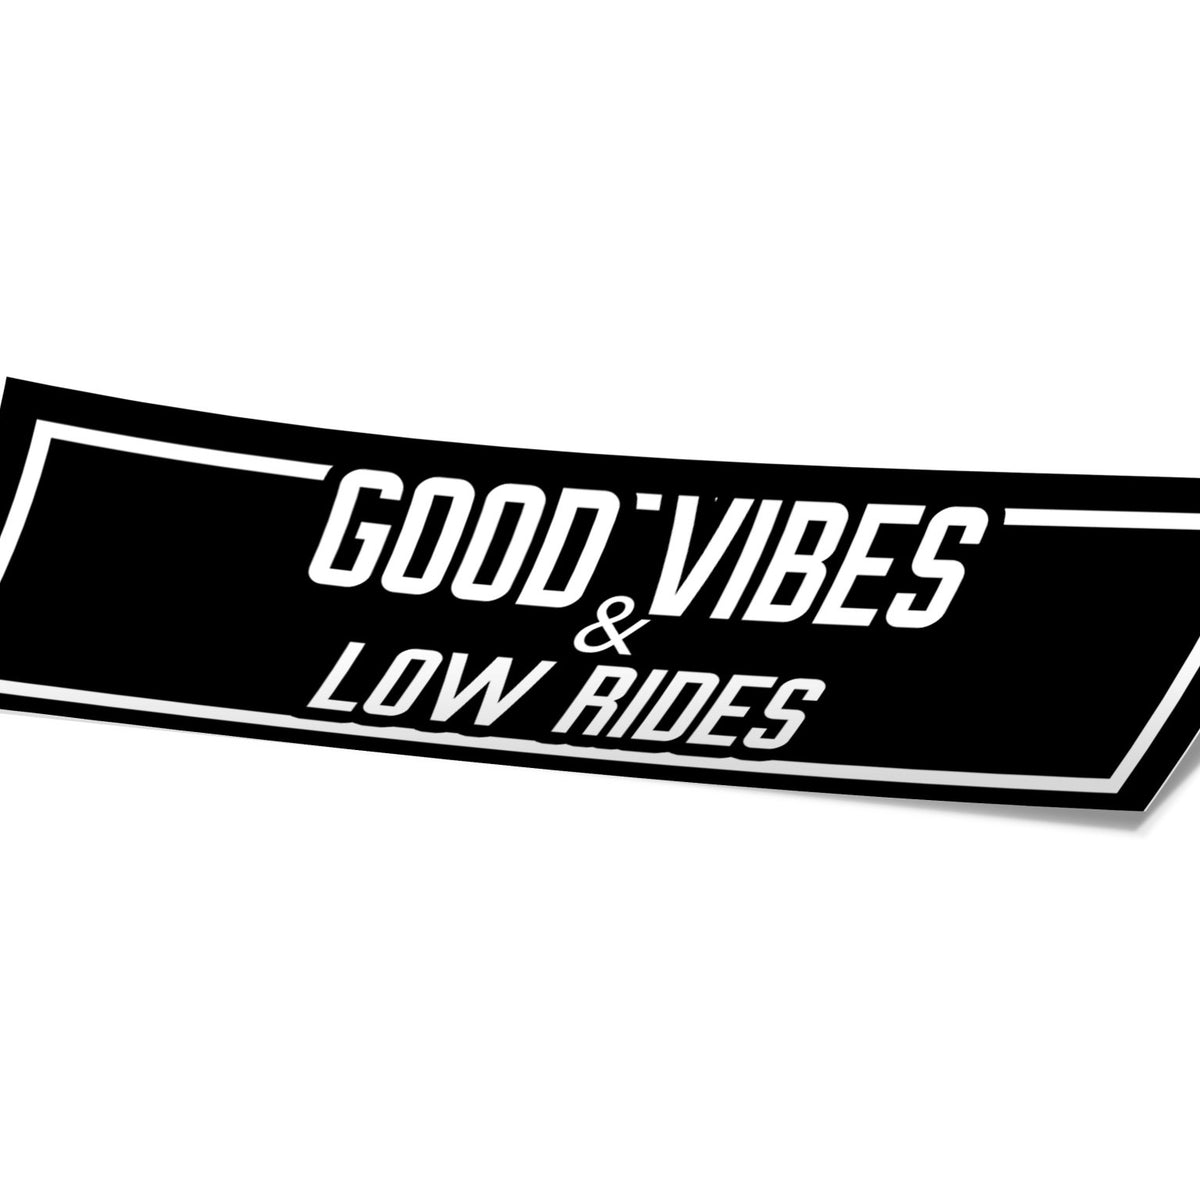 Good Vibes & Low Rides - Loweredempire